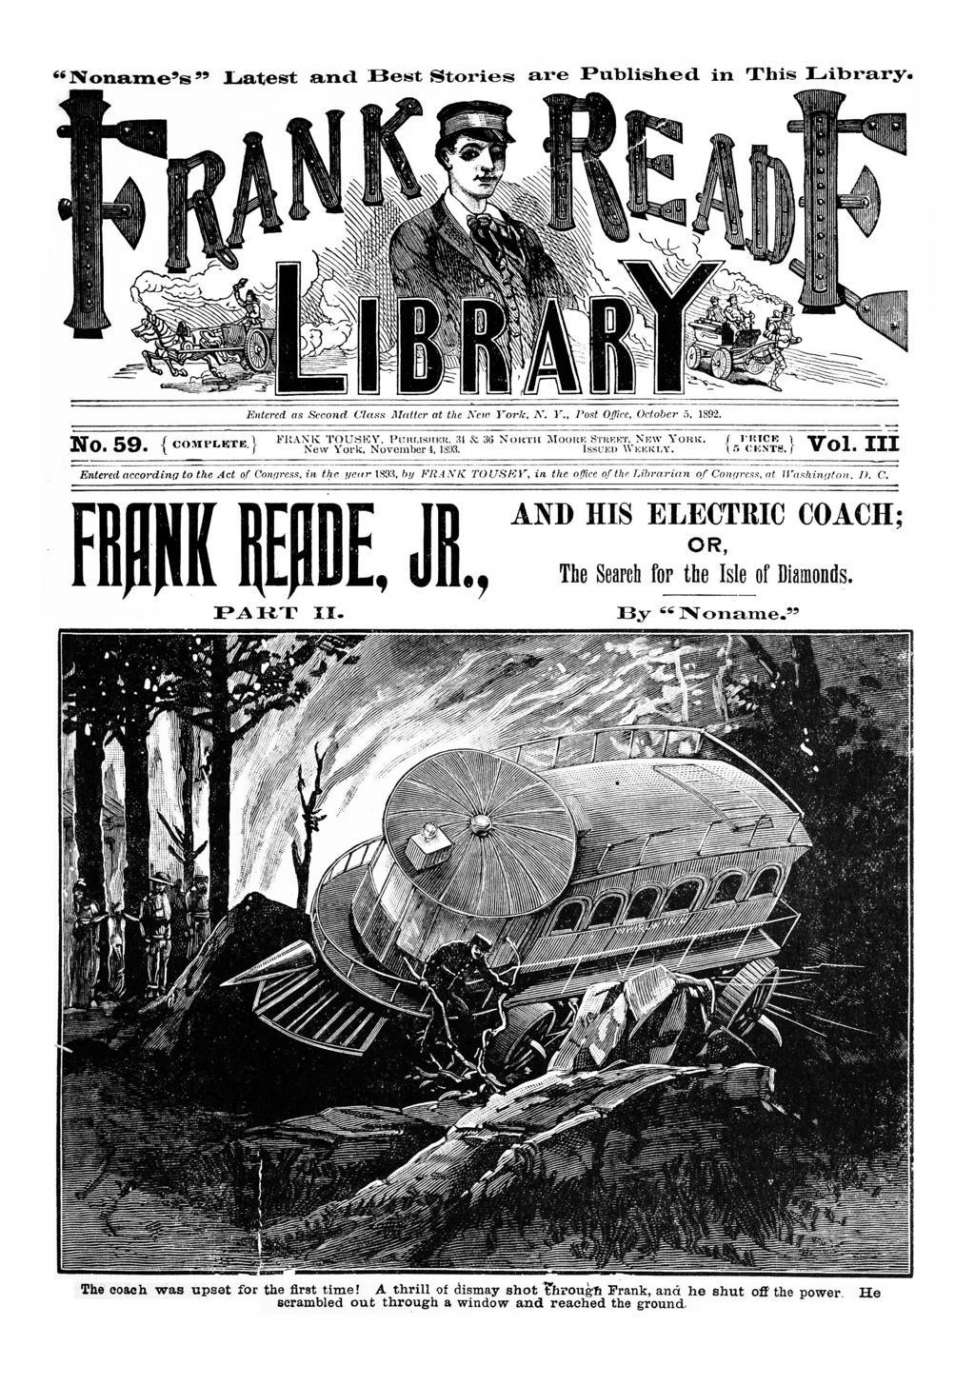 Book Cover For v03 59 - Frank Reade Jr. and His Electric Coach (Part II)